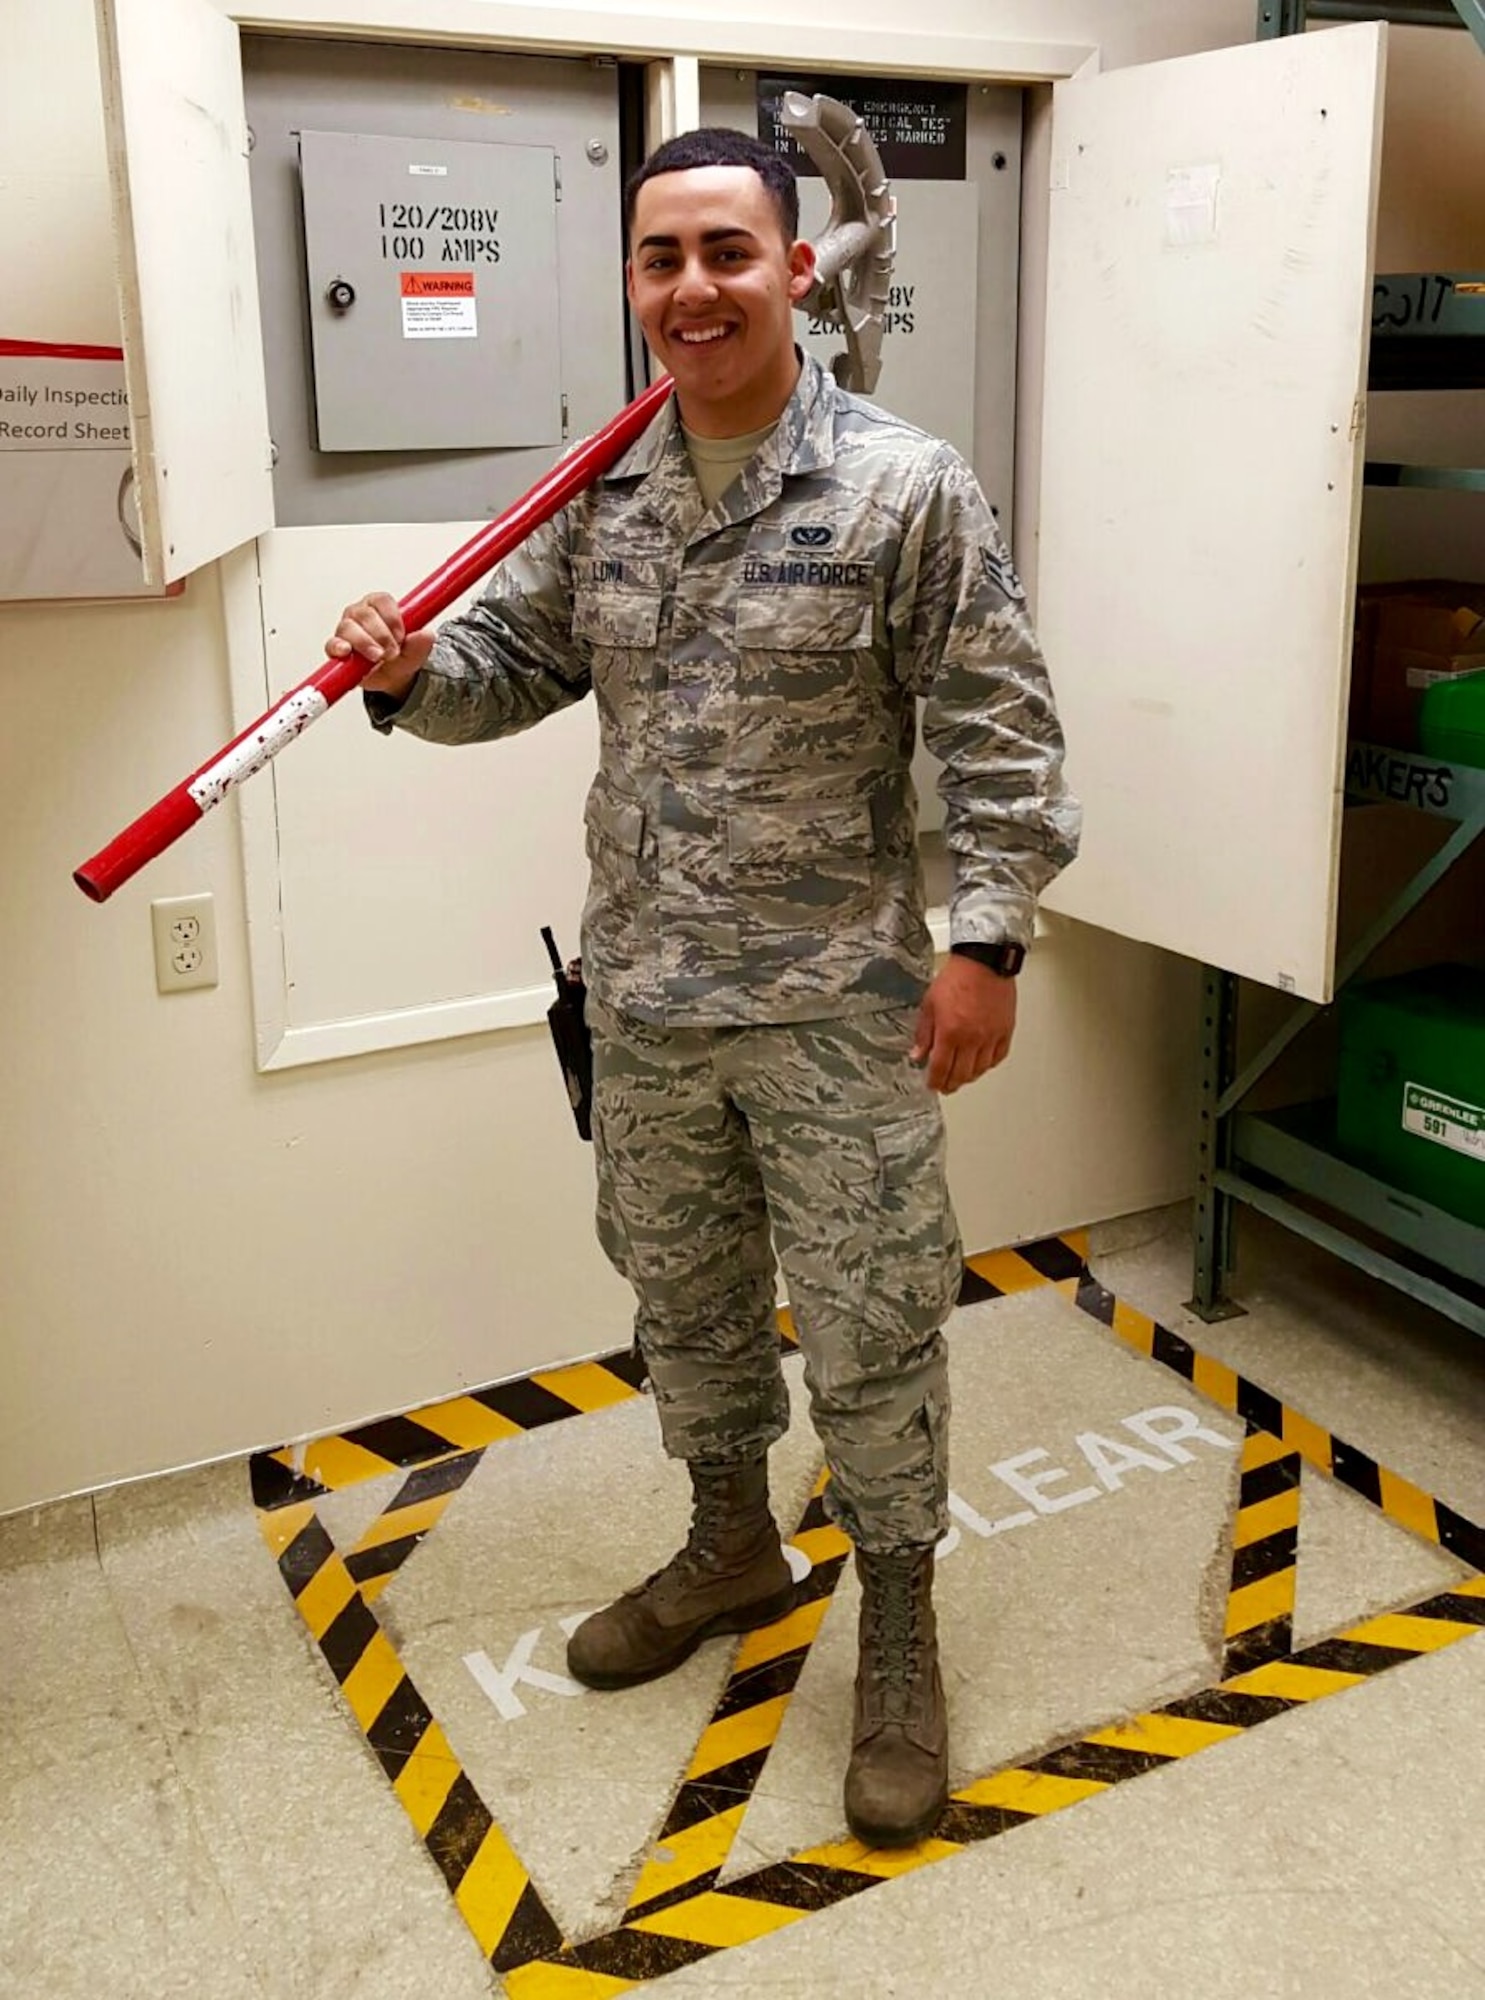 Airman 1st Class Luis Luna, 60th Civil Engineer Squadron electrical systems journeyman, poses for a photo at Travis Air Force Base, Calif., July 27, 2016. Working within the fire alarm shop, Luna performs preventative maintenance inspections on more than 250 fire alarm systems supporting three airframes and partner units on the installation. (Courtesy photo)